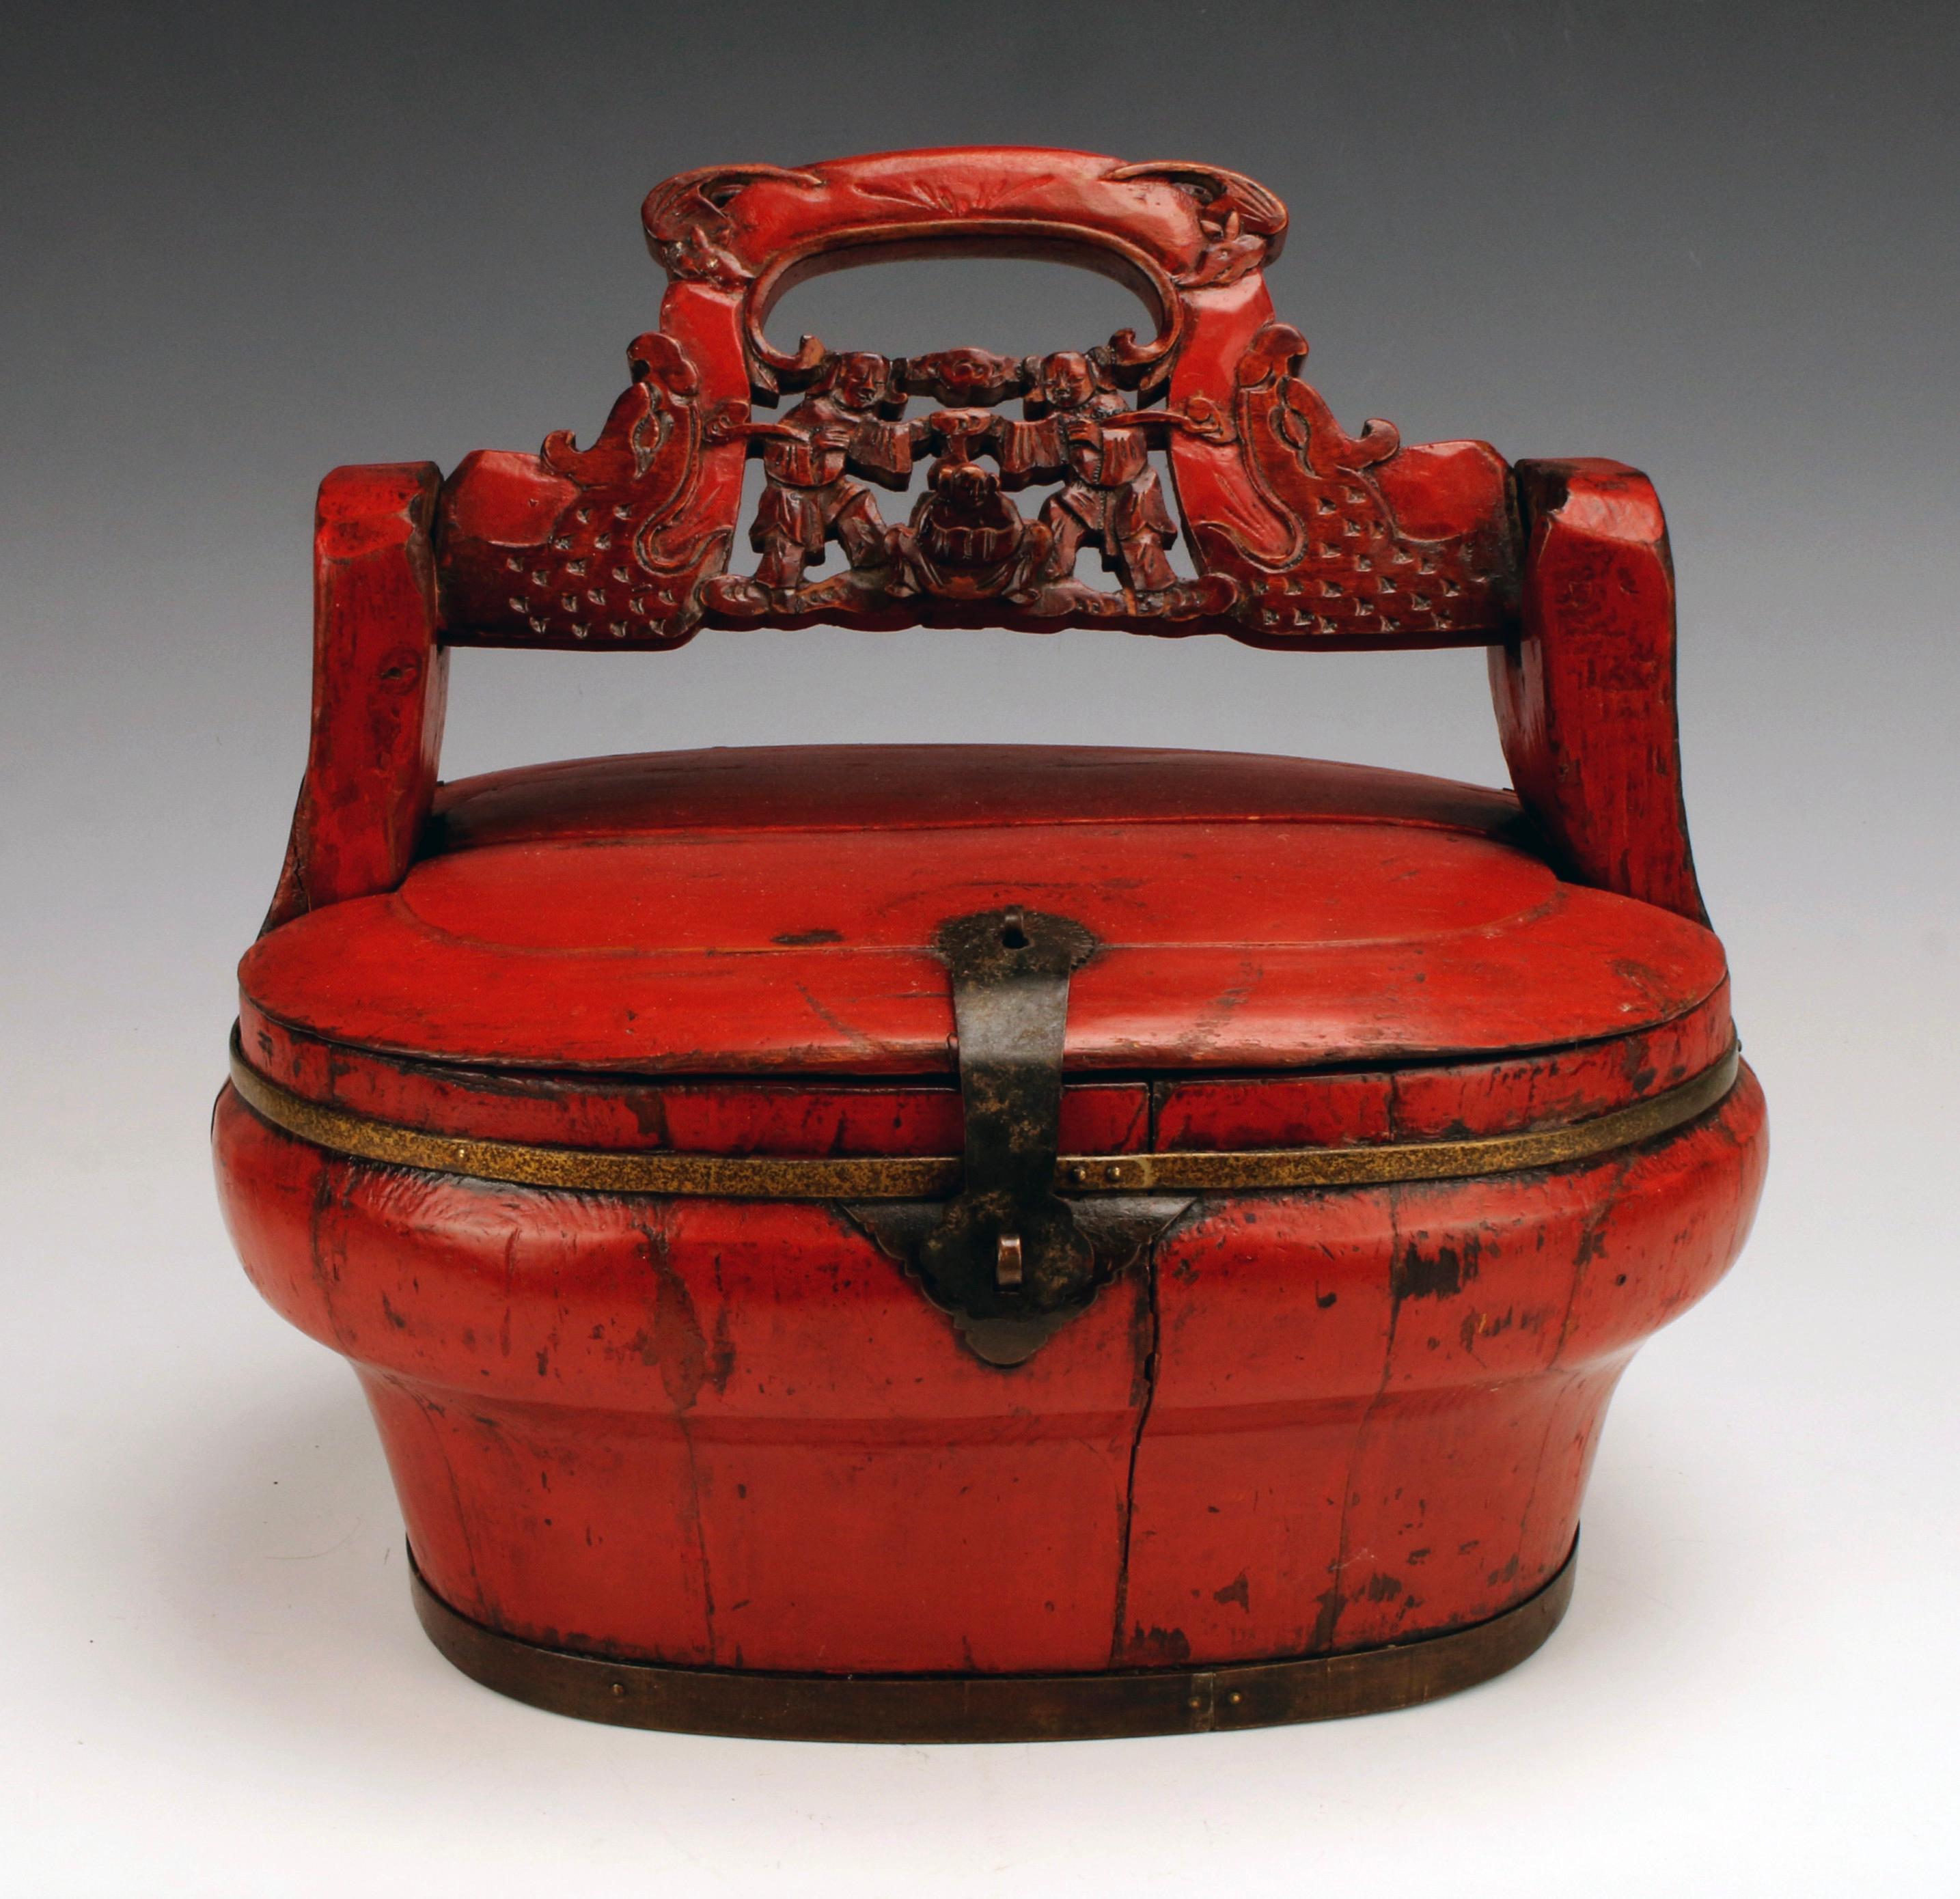 A large Chinese Red lacquer hinged basket with pierced handle. The pierced and carved handle with bats in the corners.

Measures: 13